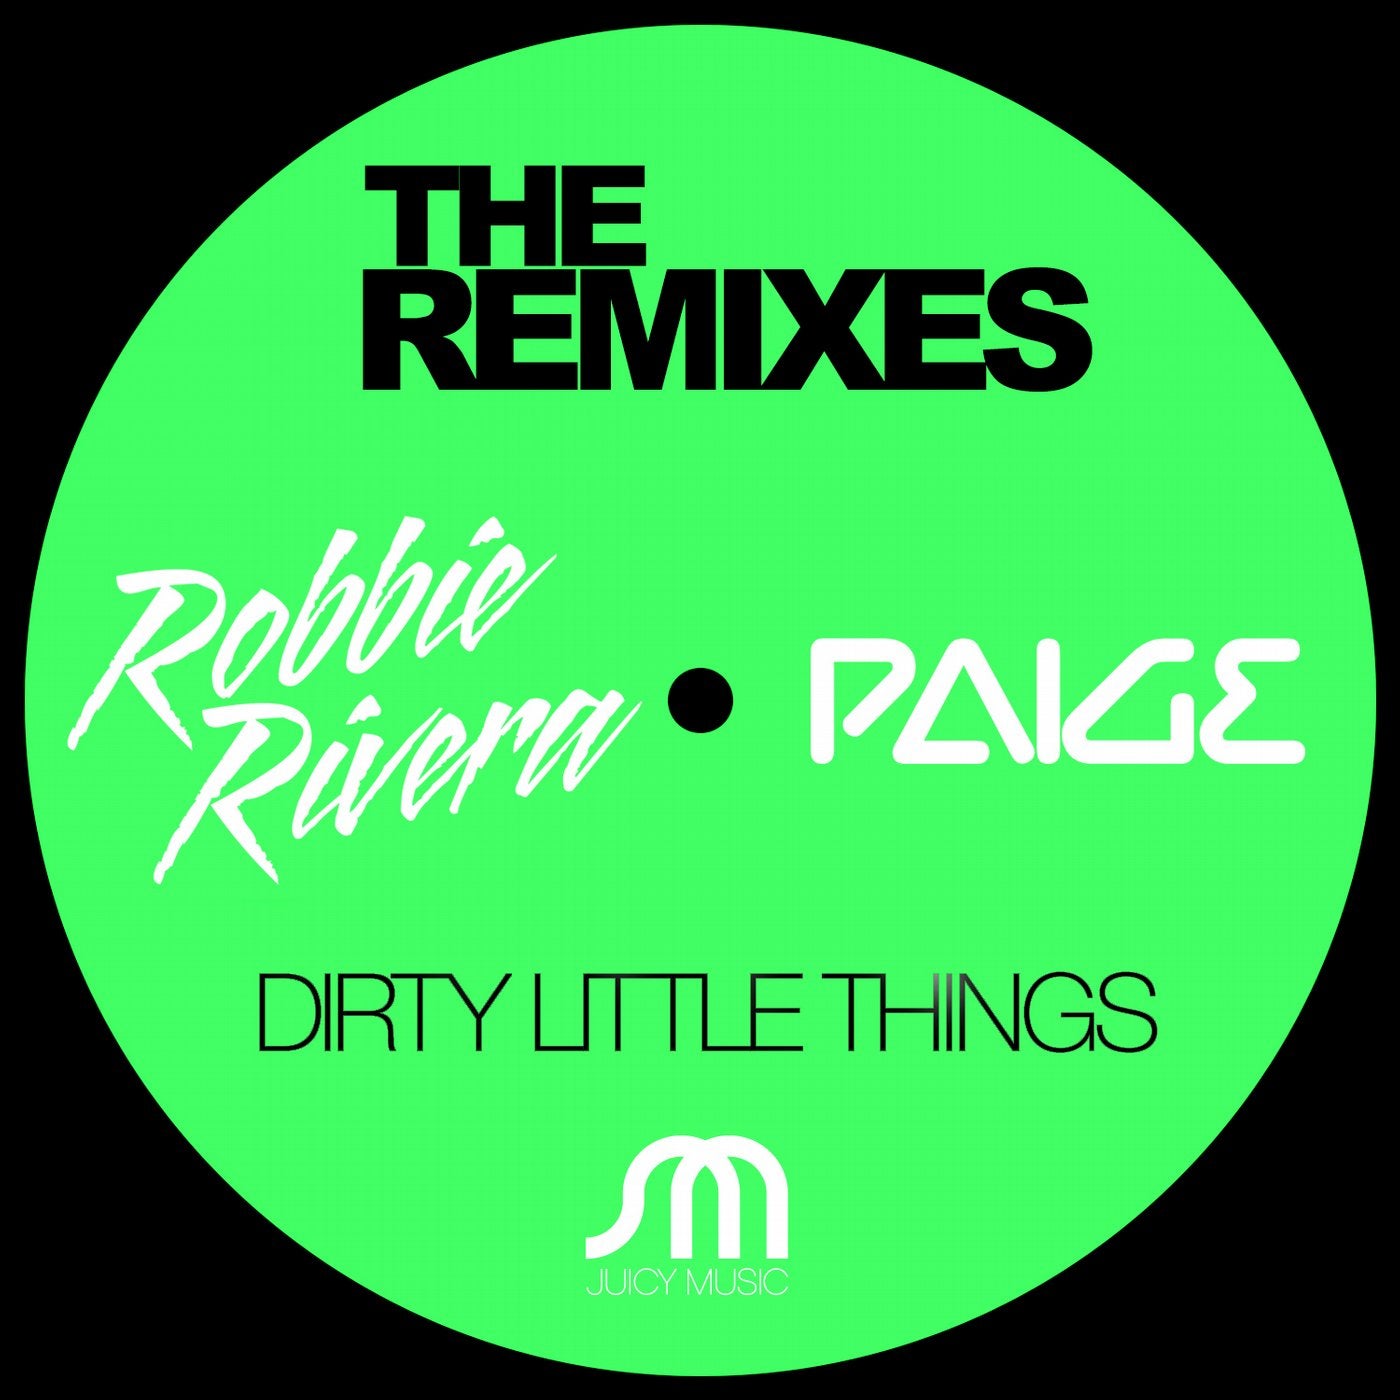 Dirty Little Things Remixes